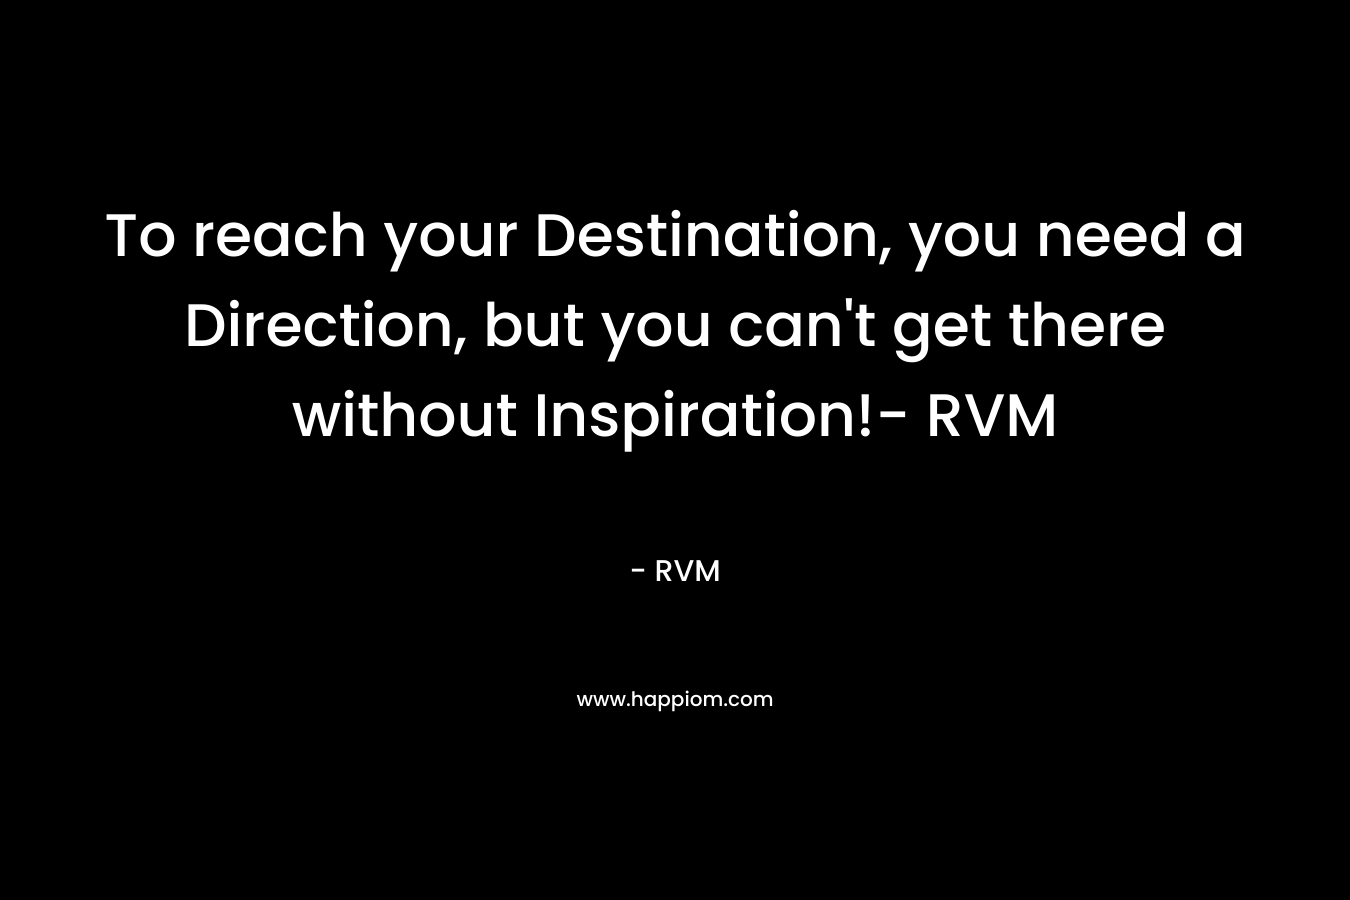 To reach your Destination, you need a Direction, but you can't get there without Inspiration!- RVM